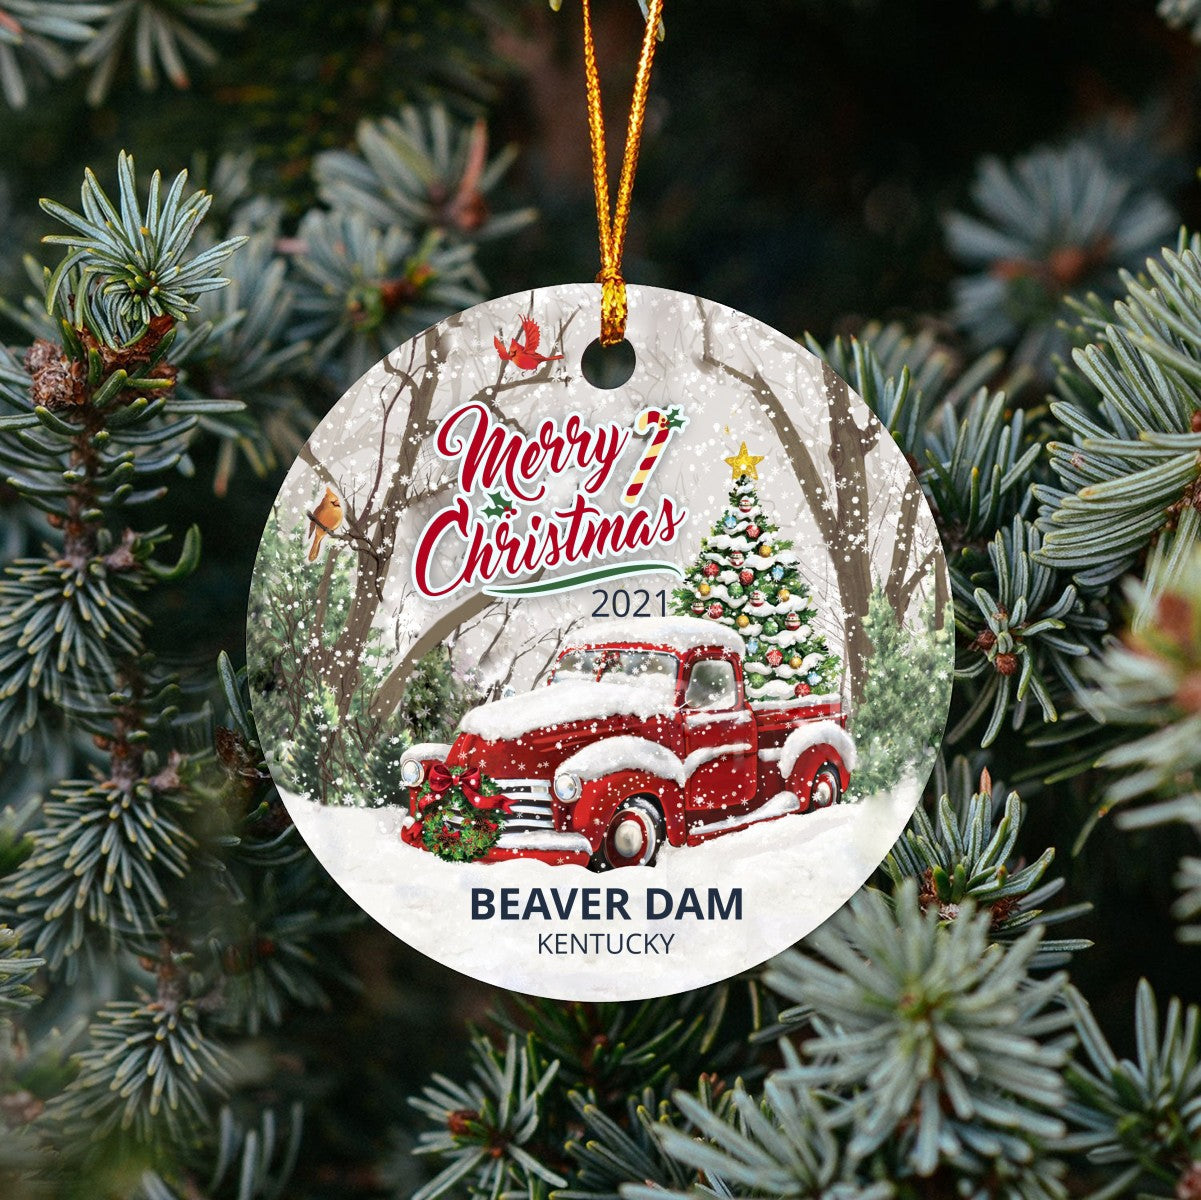 Christmas Tree Ornaments Beaver Dam - Ornament With Name City, State Beaver Dam Kentucky KY Ornament - Red Truck Xmas Ornaments 3'' Plastic Gift For Family, Friend And Housewarming